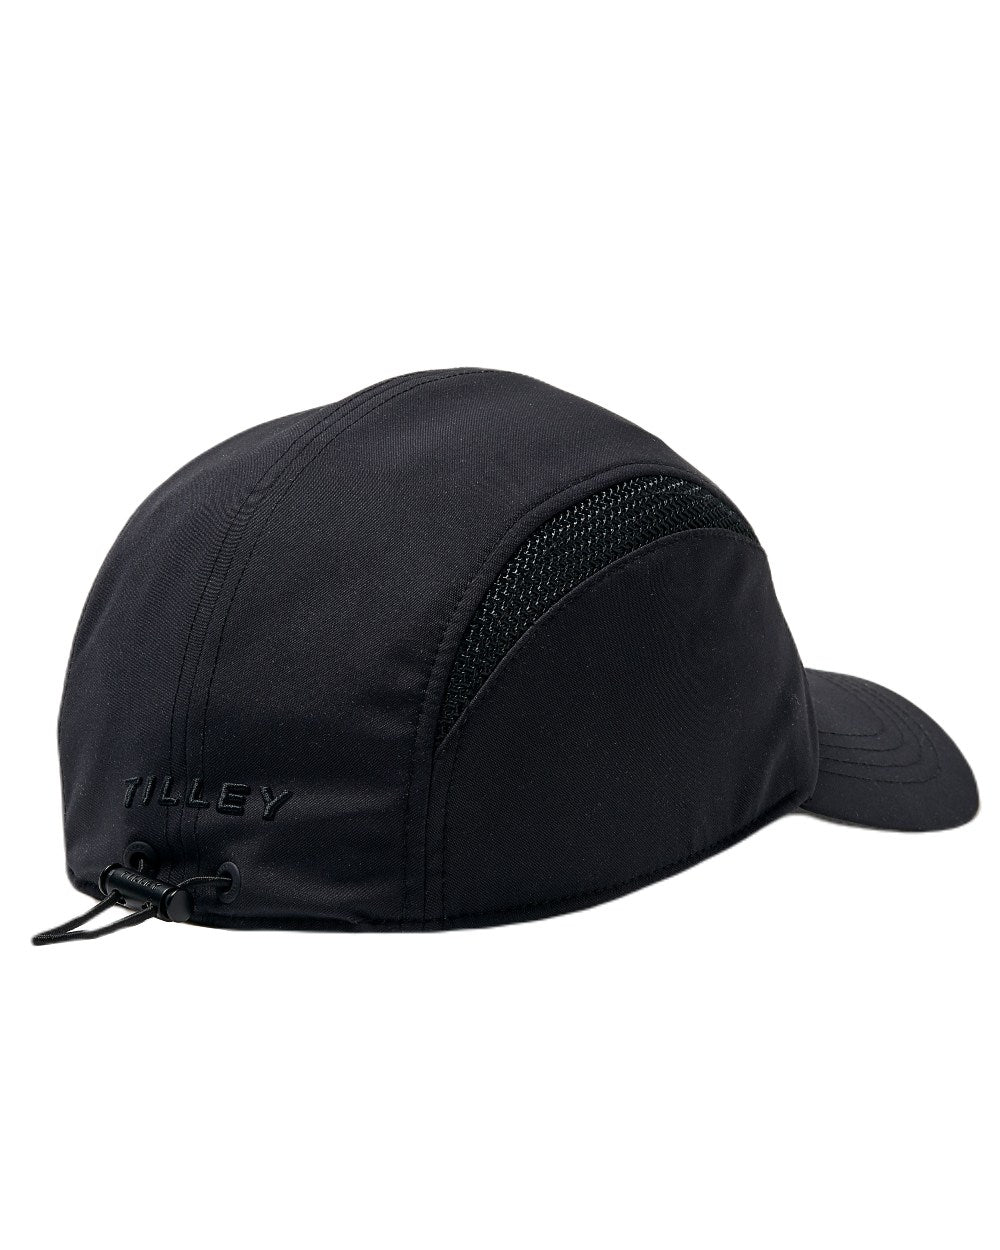 Black Coloured Tilley Hat Airflo Cap On A White Background 